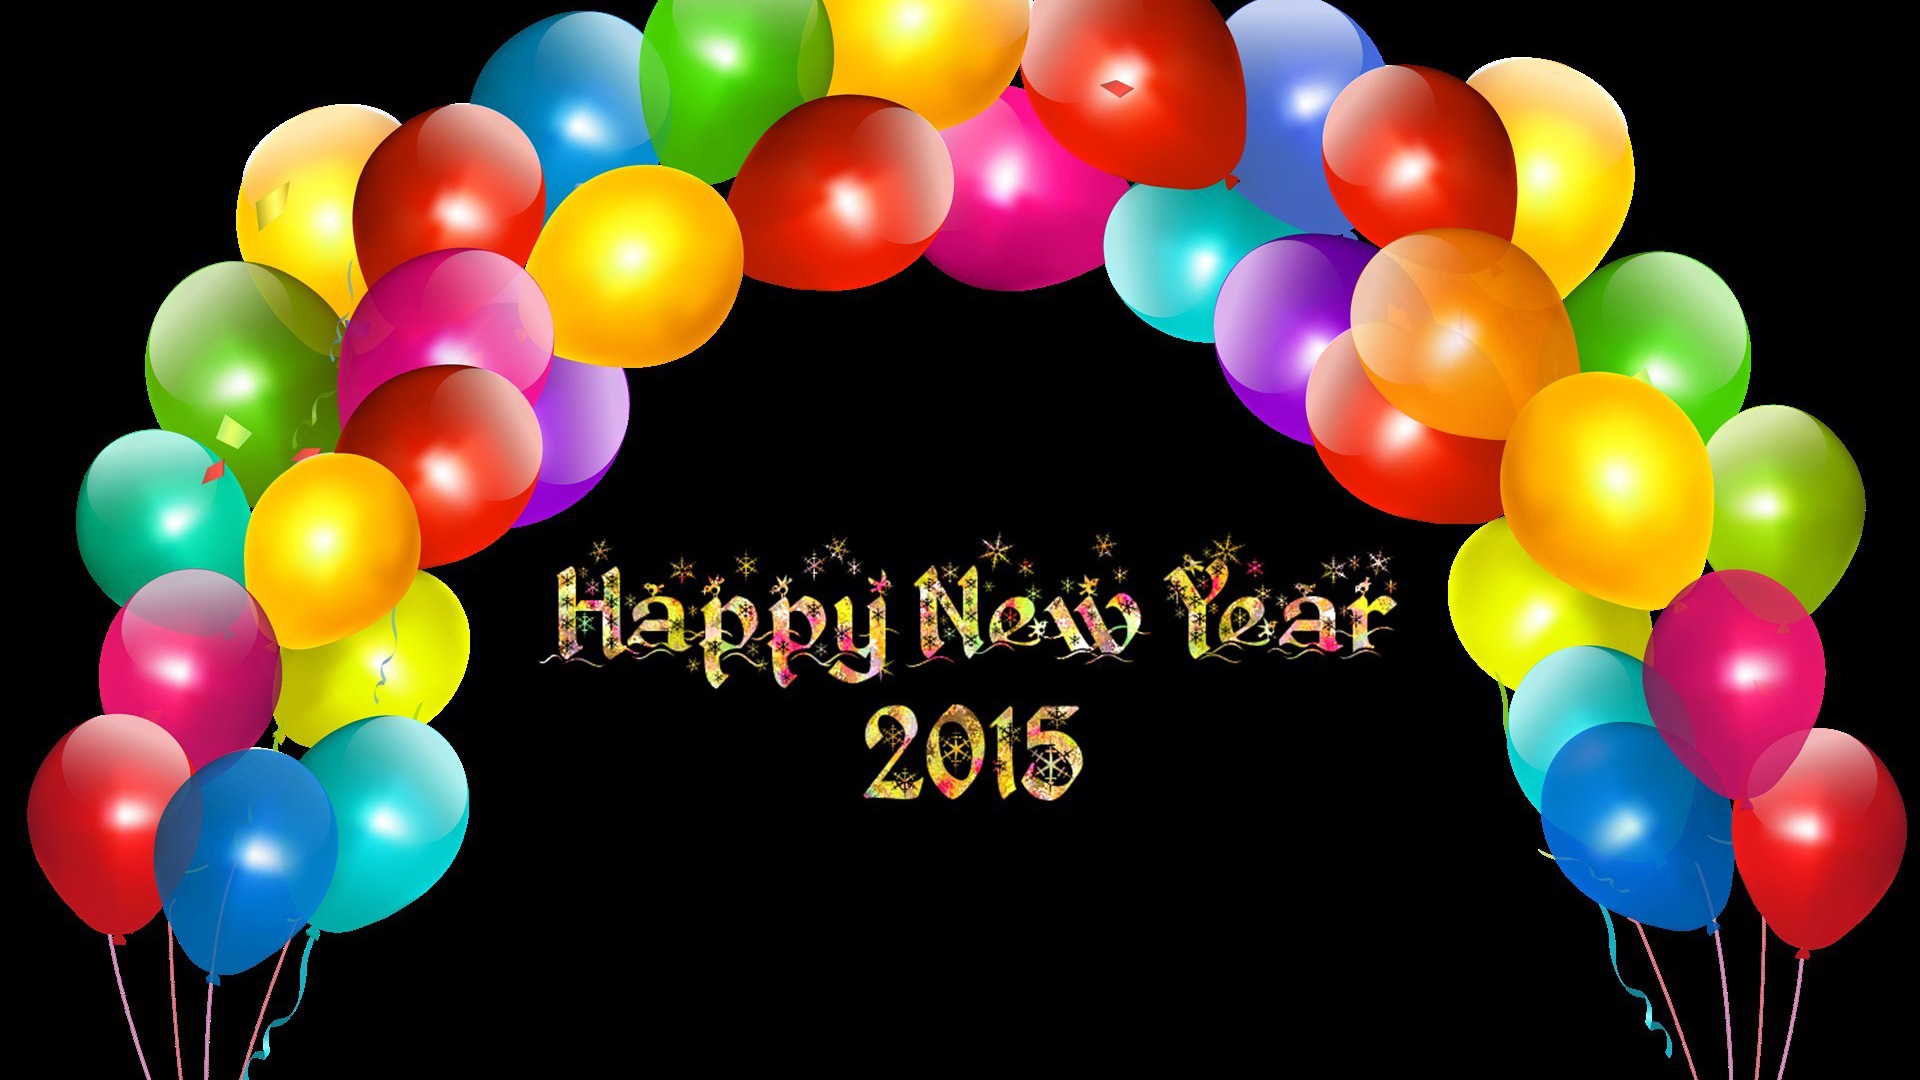 2015 New Year theme HD wallpapers (2) #6 - 1920x1080